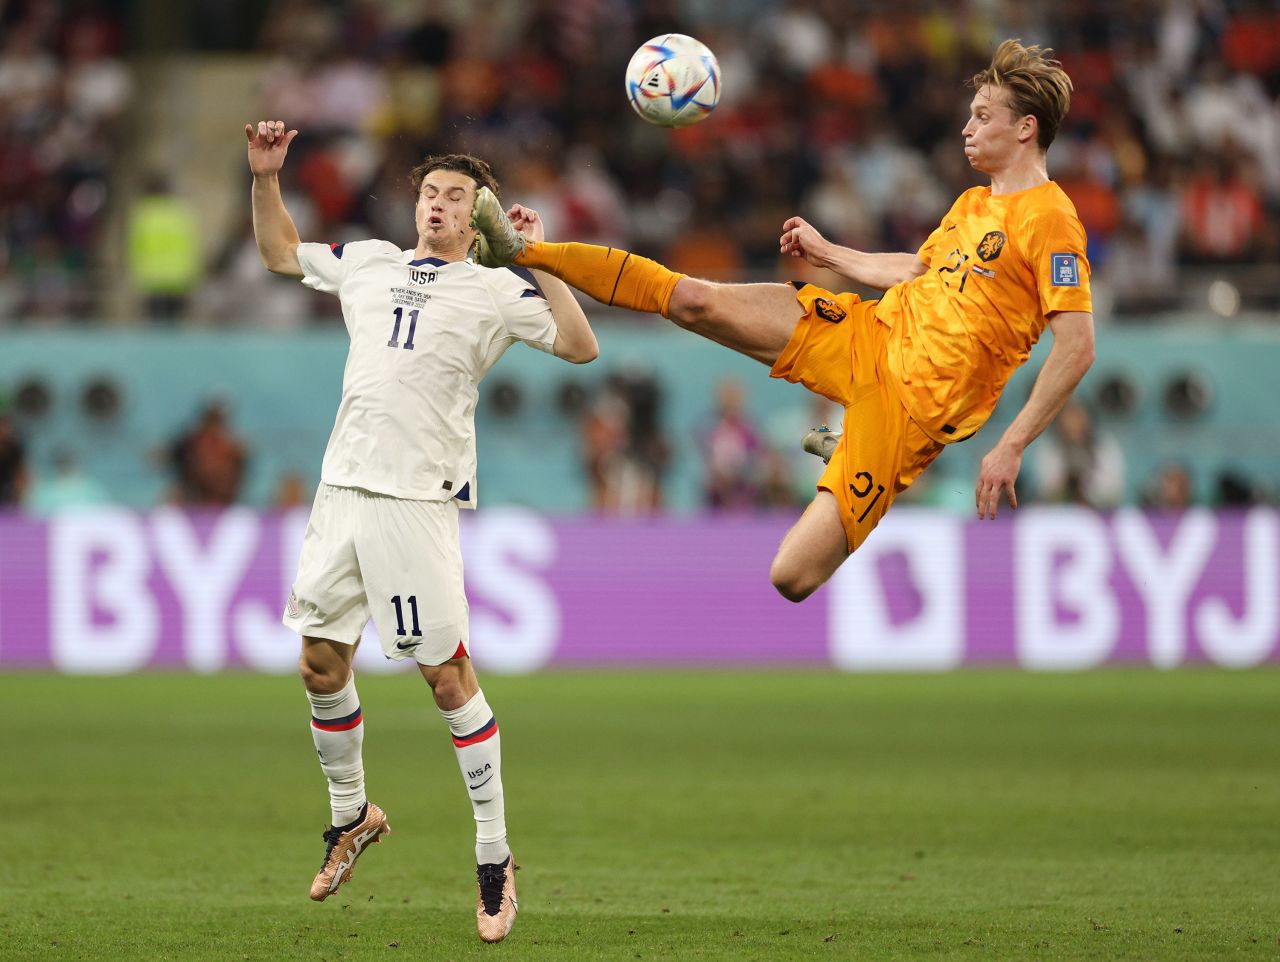 The United States' Brenden Aaronson, left, and the Netherlands' Frenkie de Jong battle for the ball on Saturday.